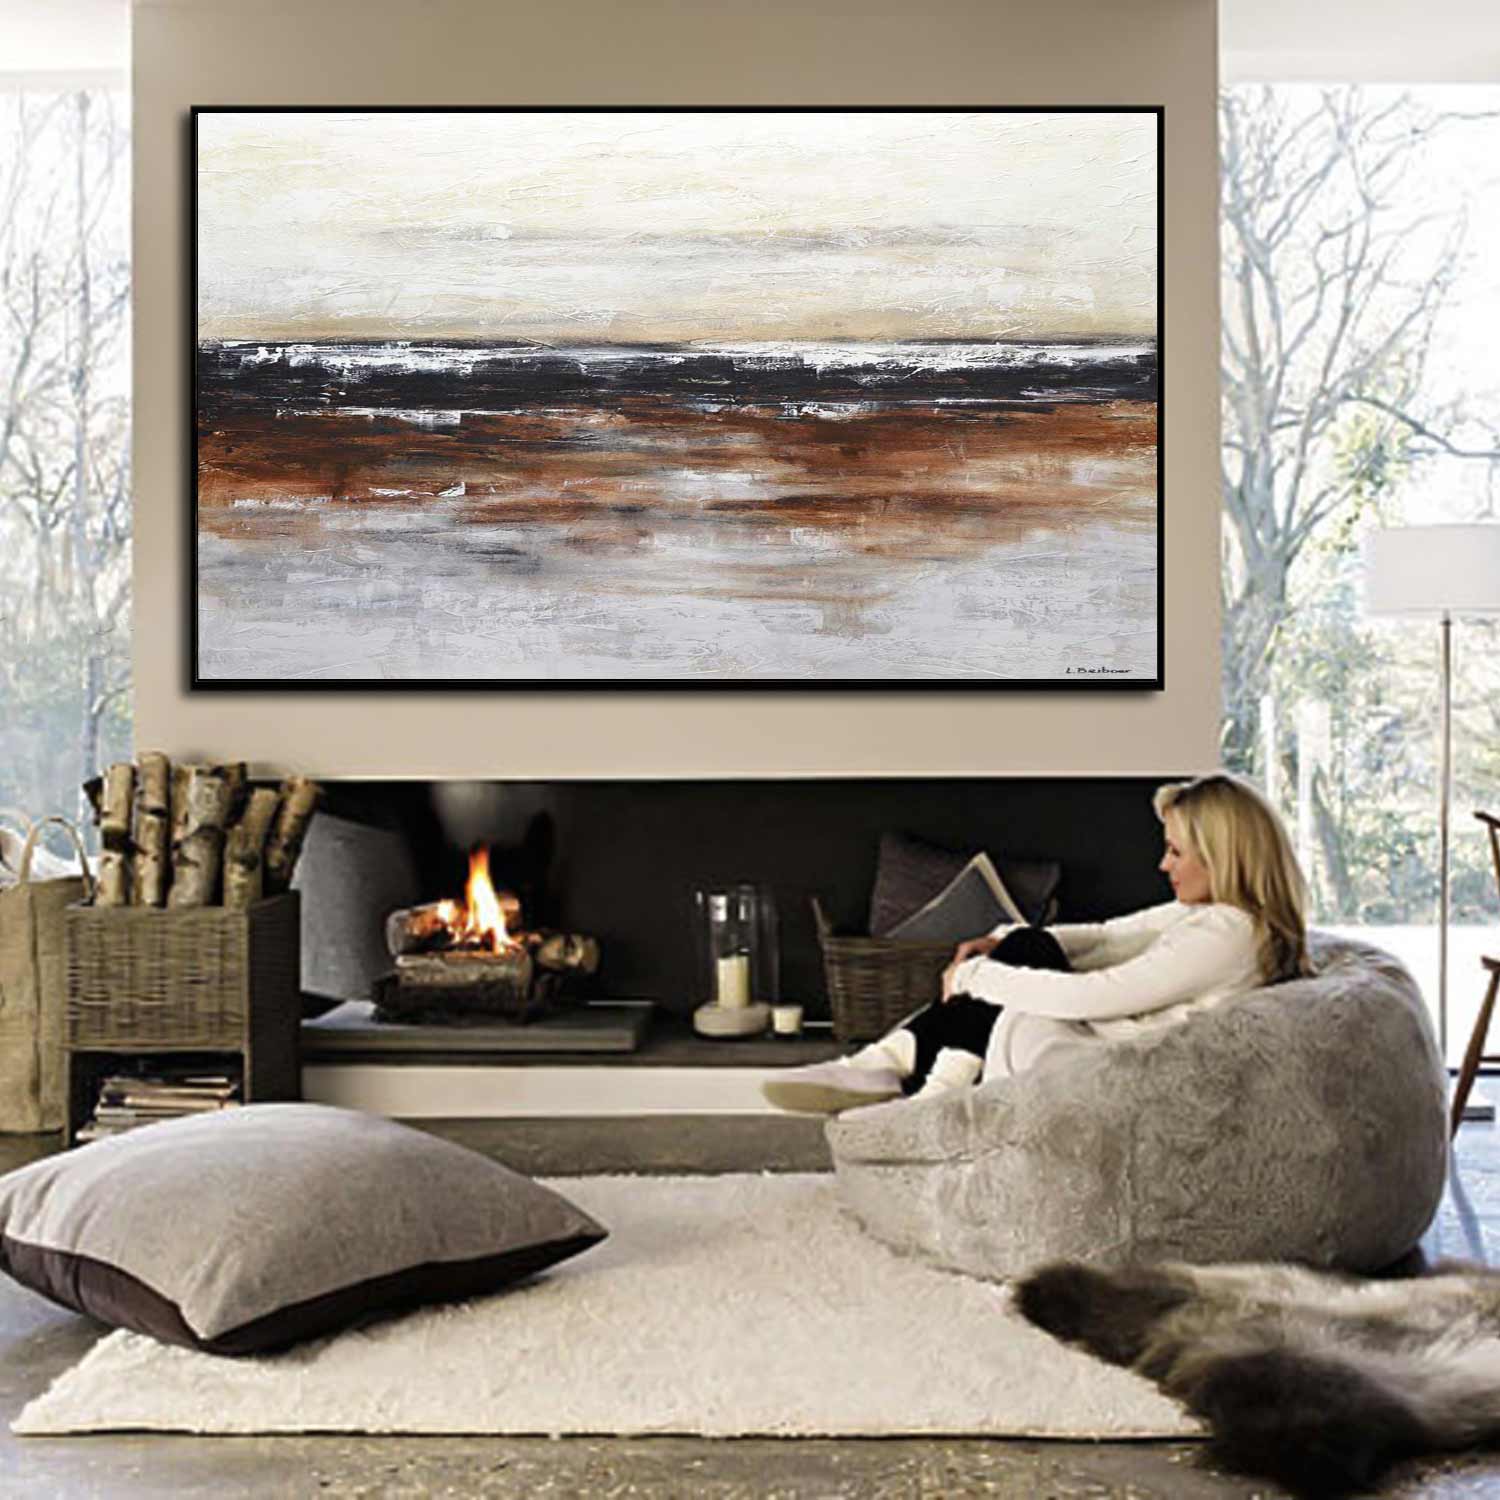 Warm Colors Painting Abstract Horizon Art "Inner Calm"